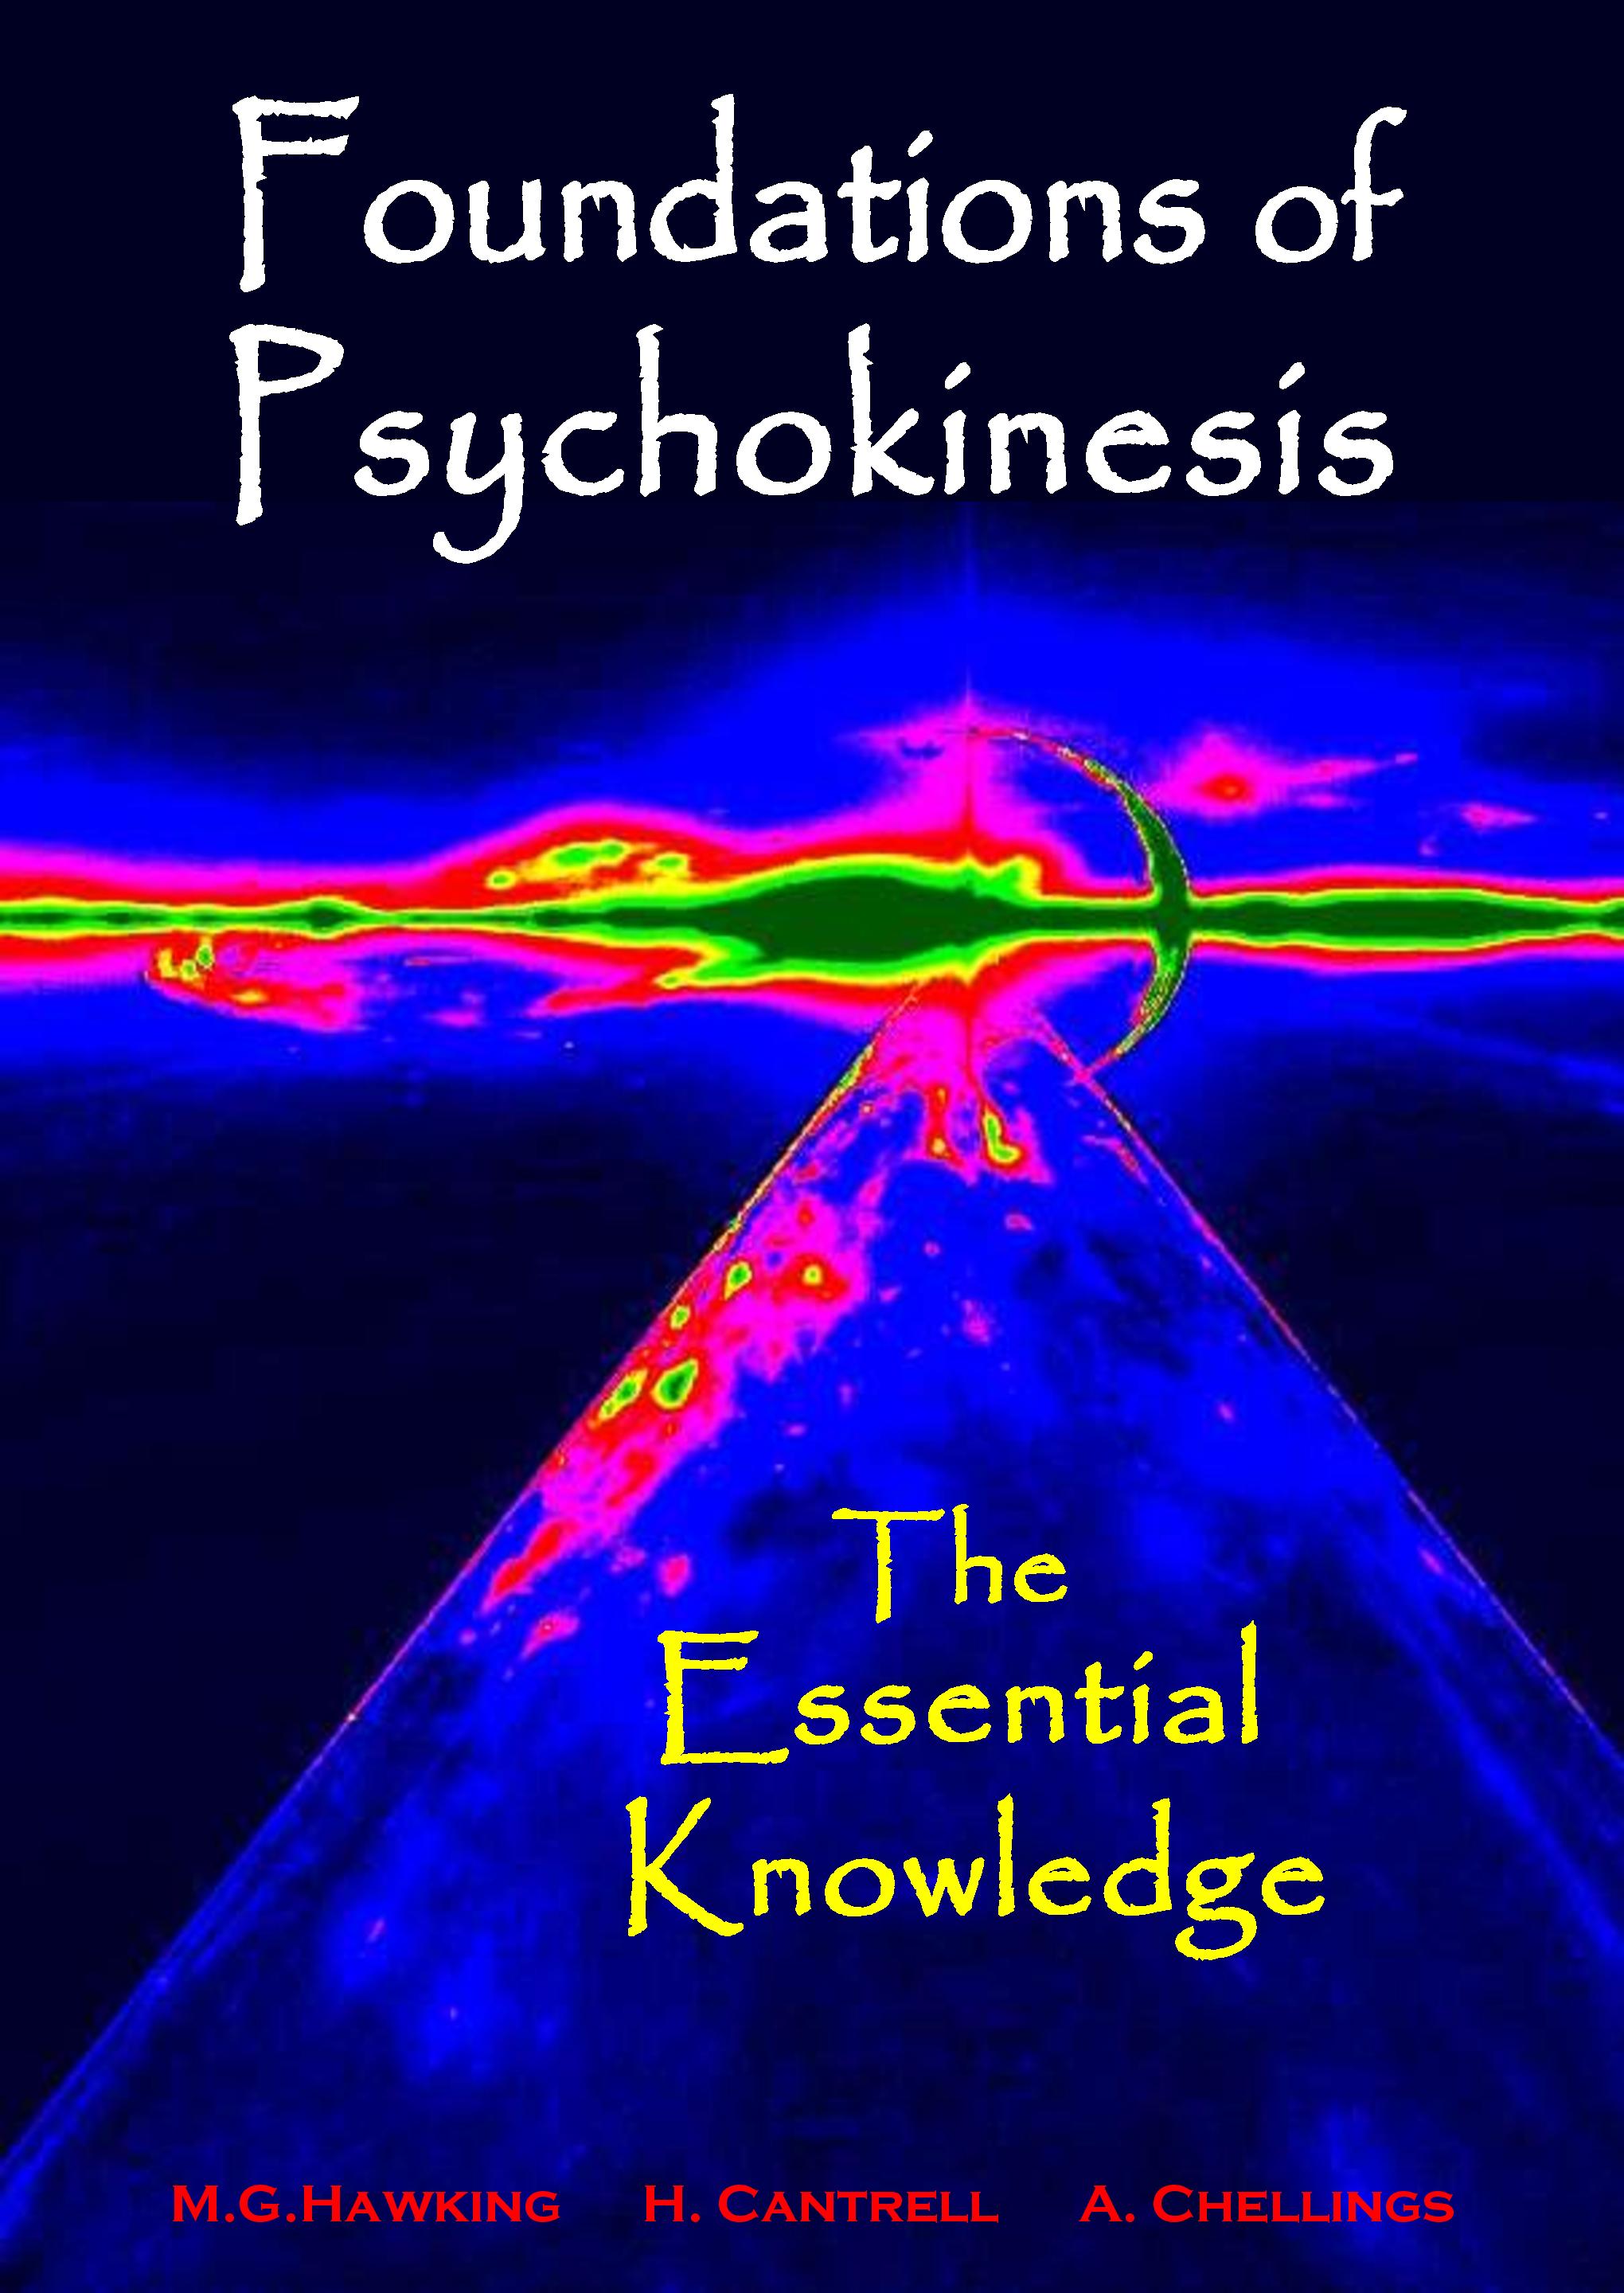 Foundations of Psychokinesis book cover